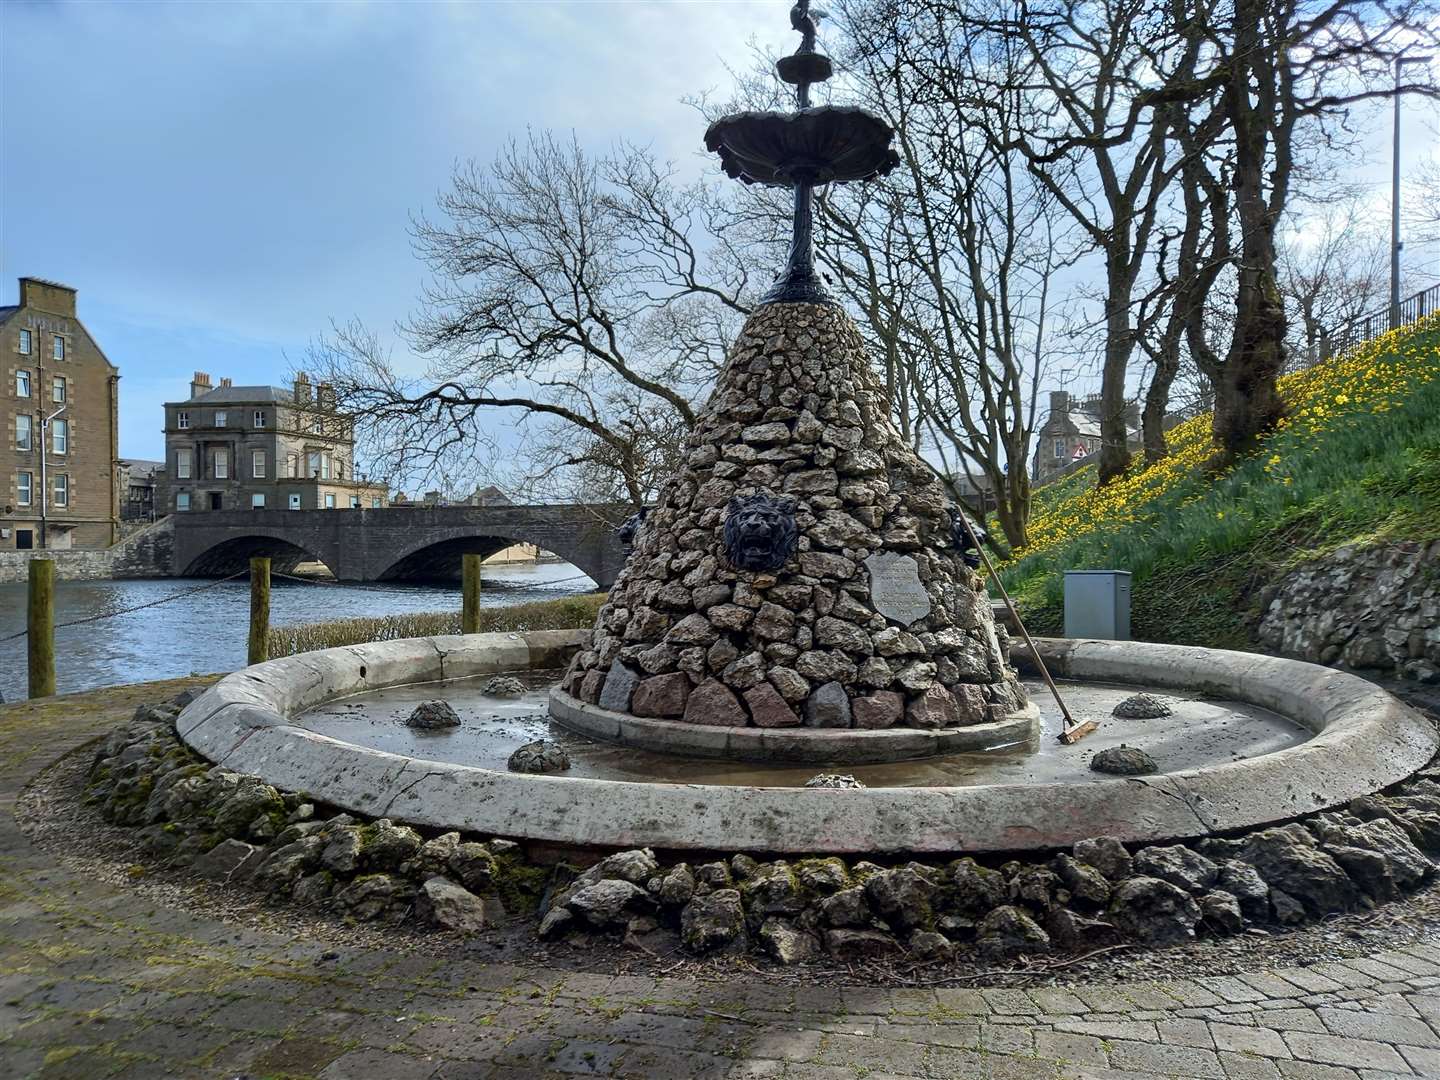 Wick Fountain after a clean up earlier this week, photographed by Derek Bremner.